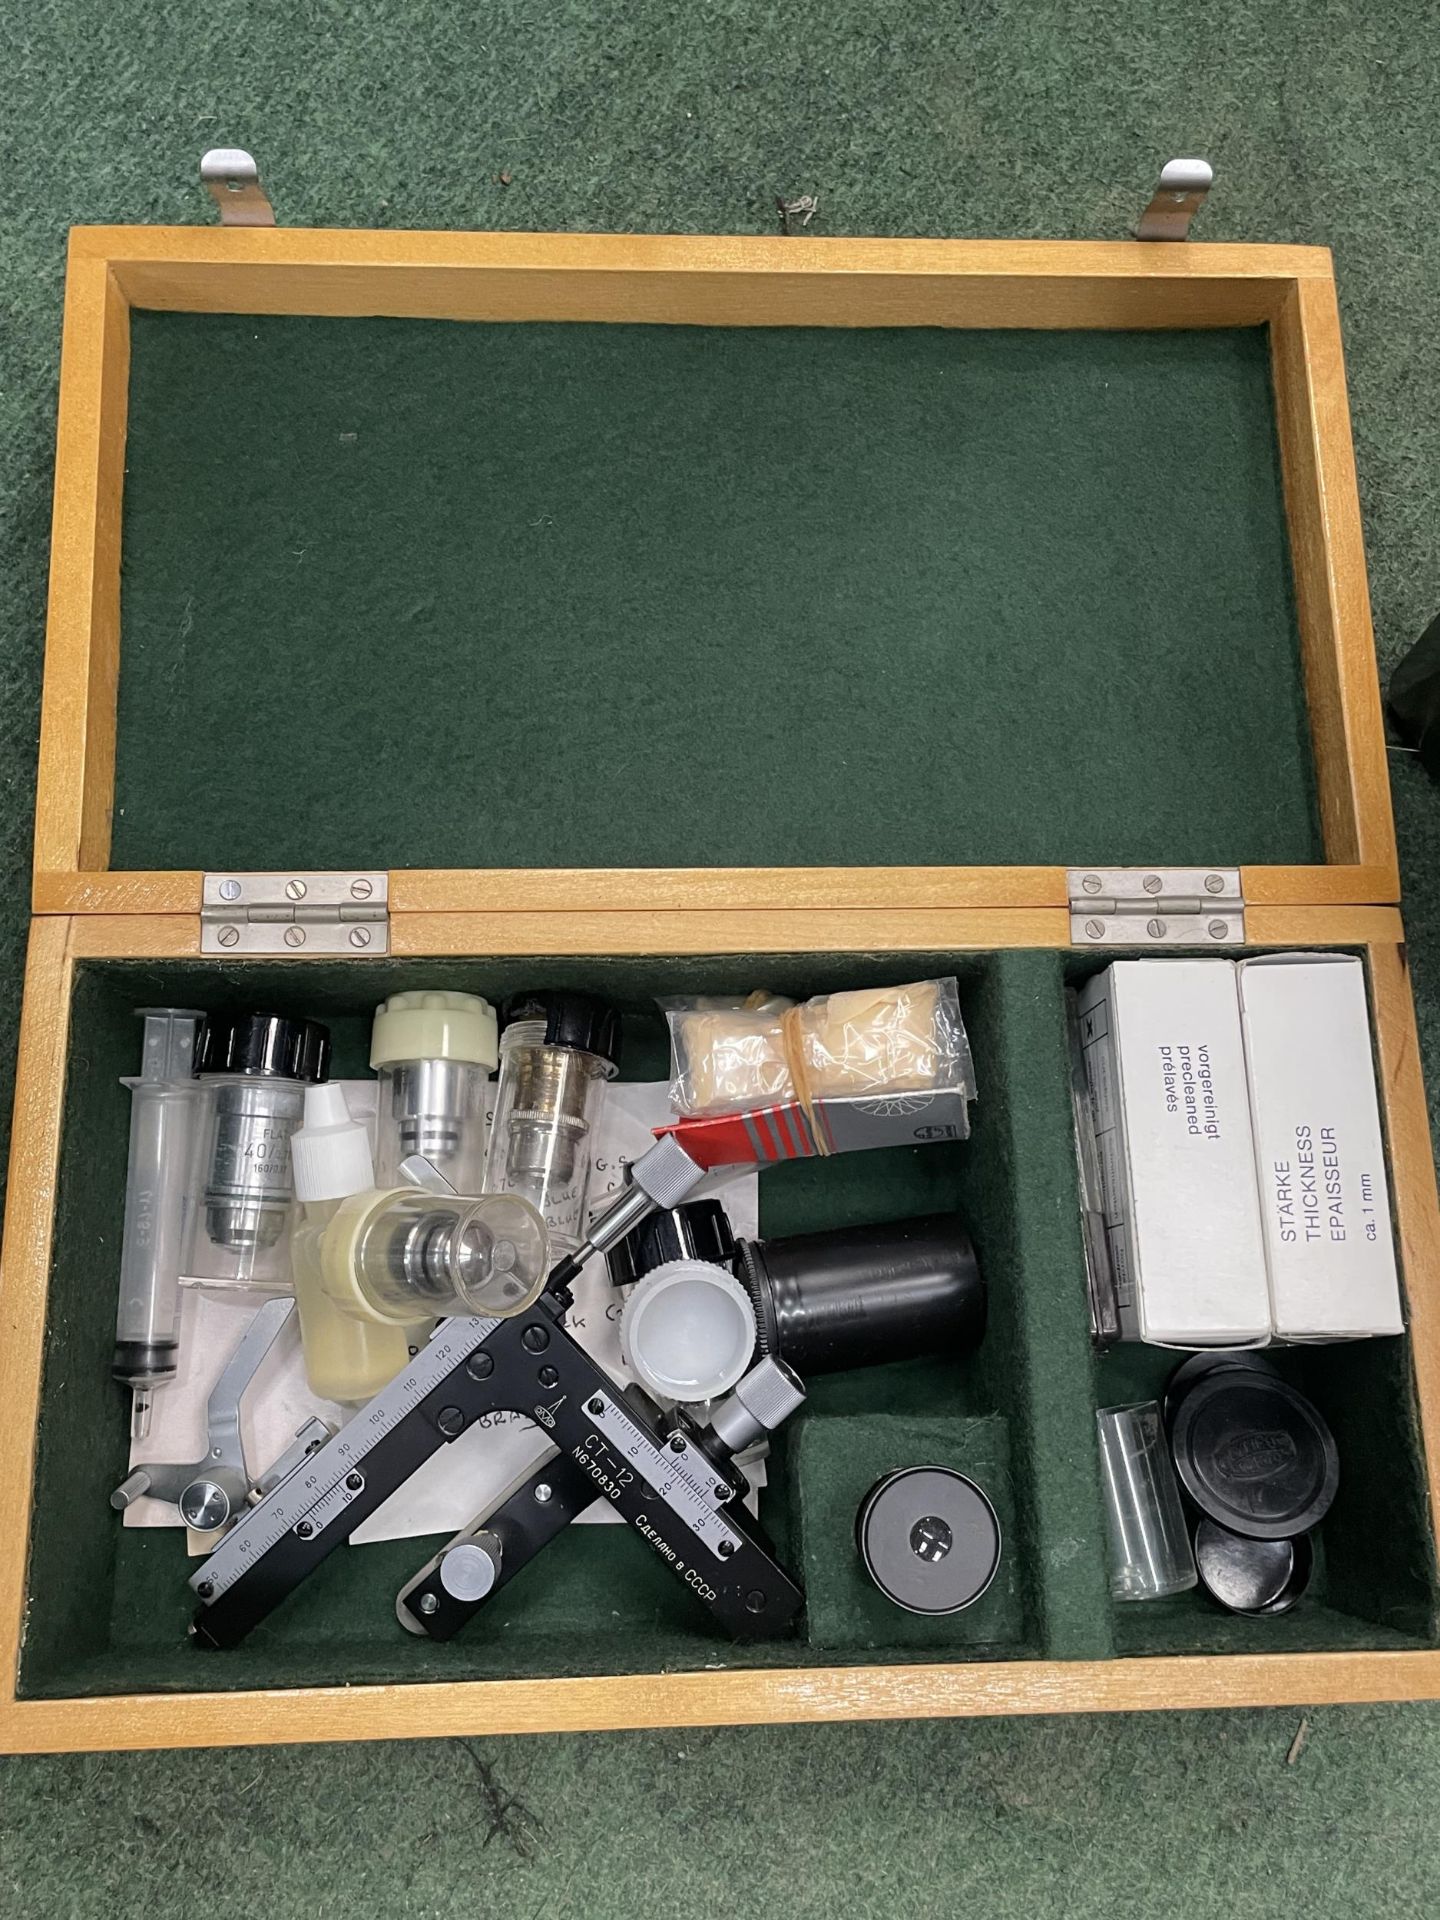 A GS LONDON M 57805 MICROSCOPE AND ASSORTED SLIDES AND ACCESSORIES IN WOODEN BOX - Image 8 of 10